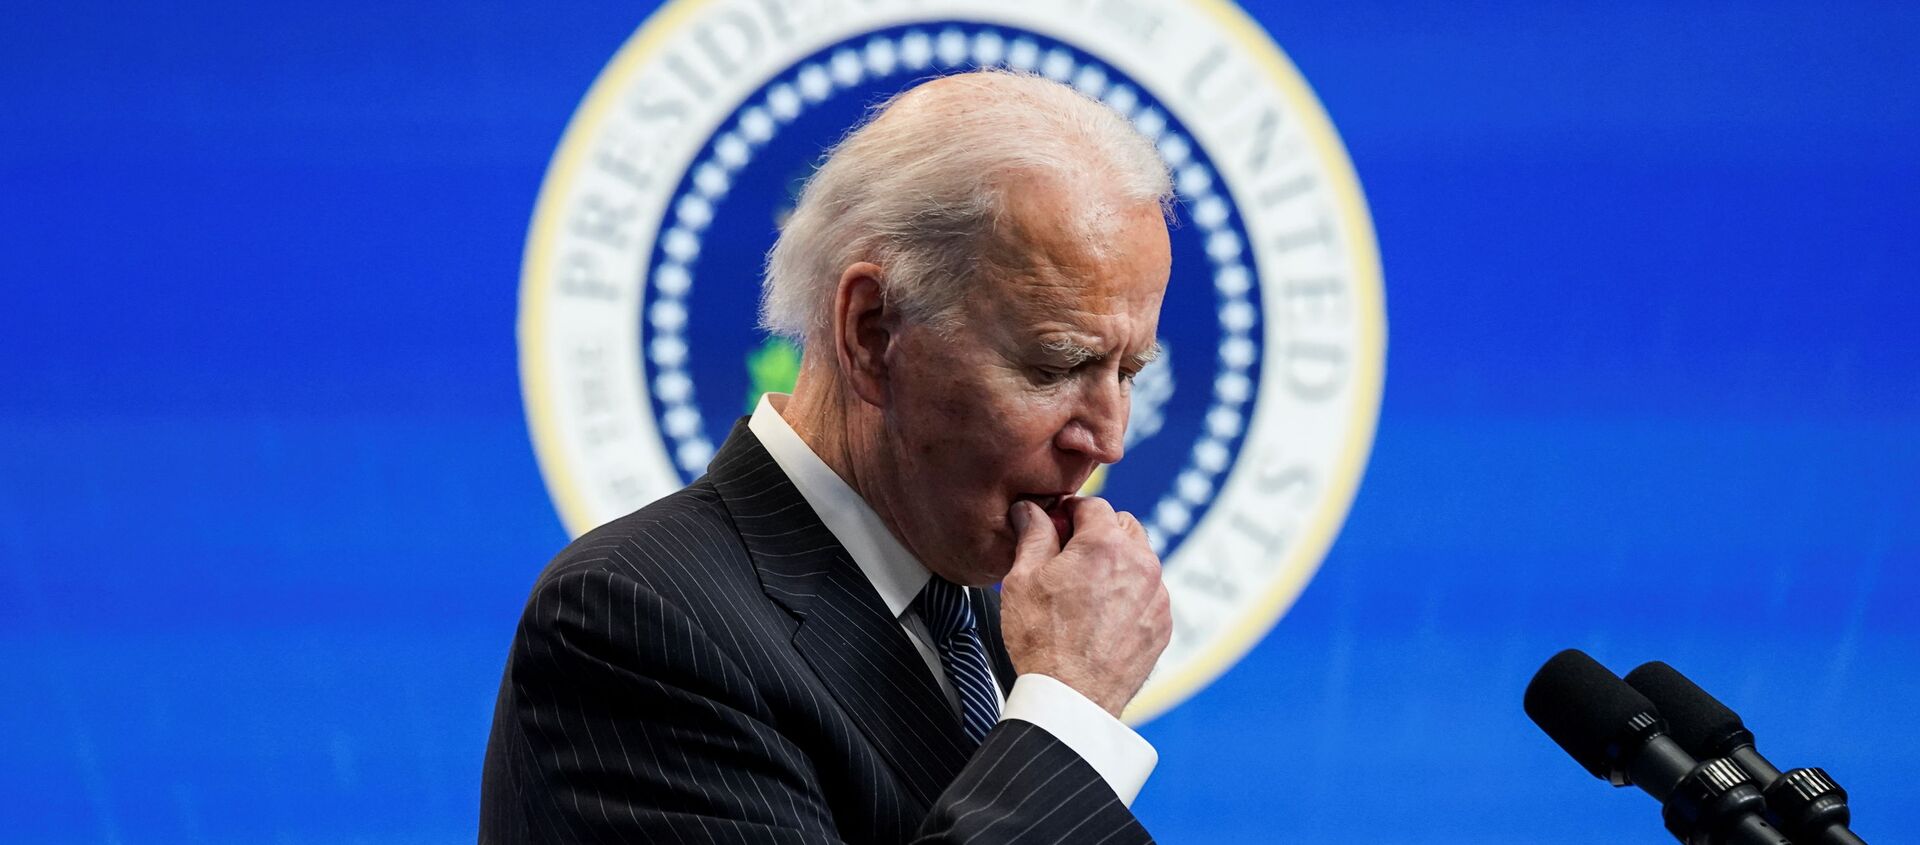 US President Joe Biden pauses as he speaks about his administration's plans to strengthen American manufacturing during a brief appearance in the South Court Auditorium at the White House in Washington, DC, 25 January 2021 - Sputnik International, 1920, 28.01.2021